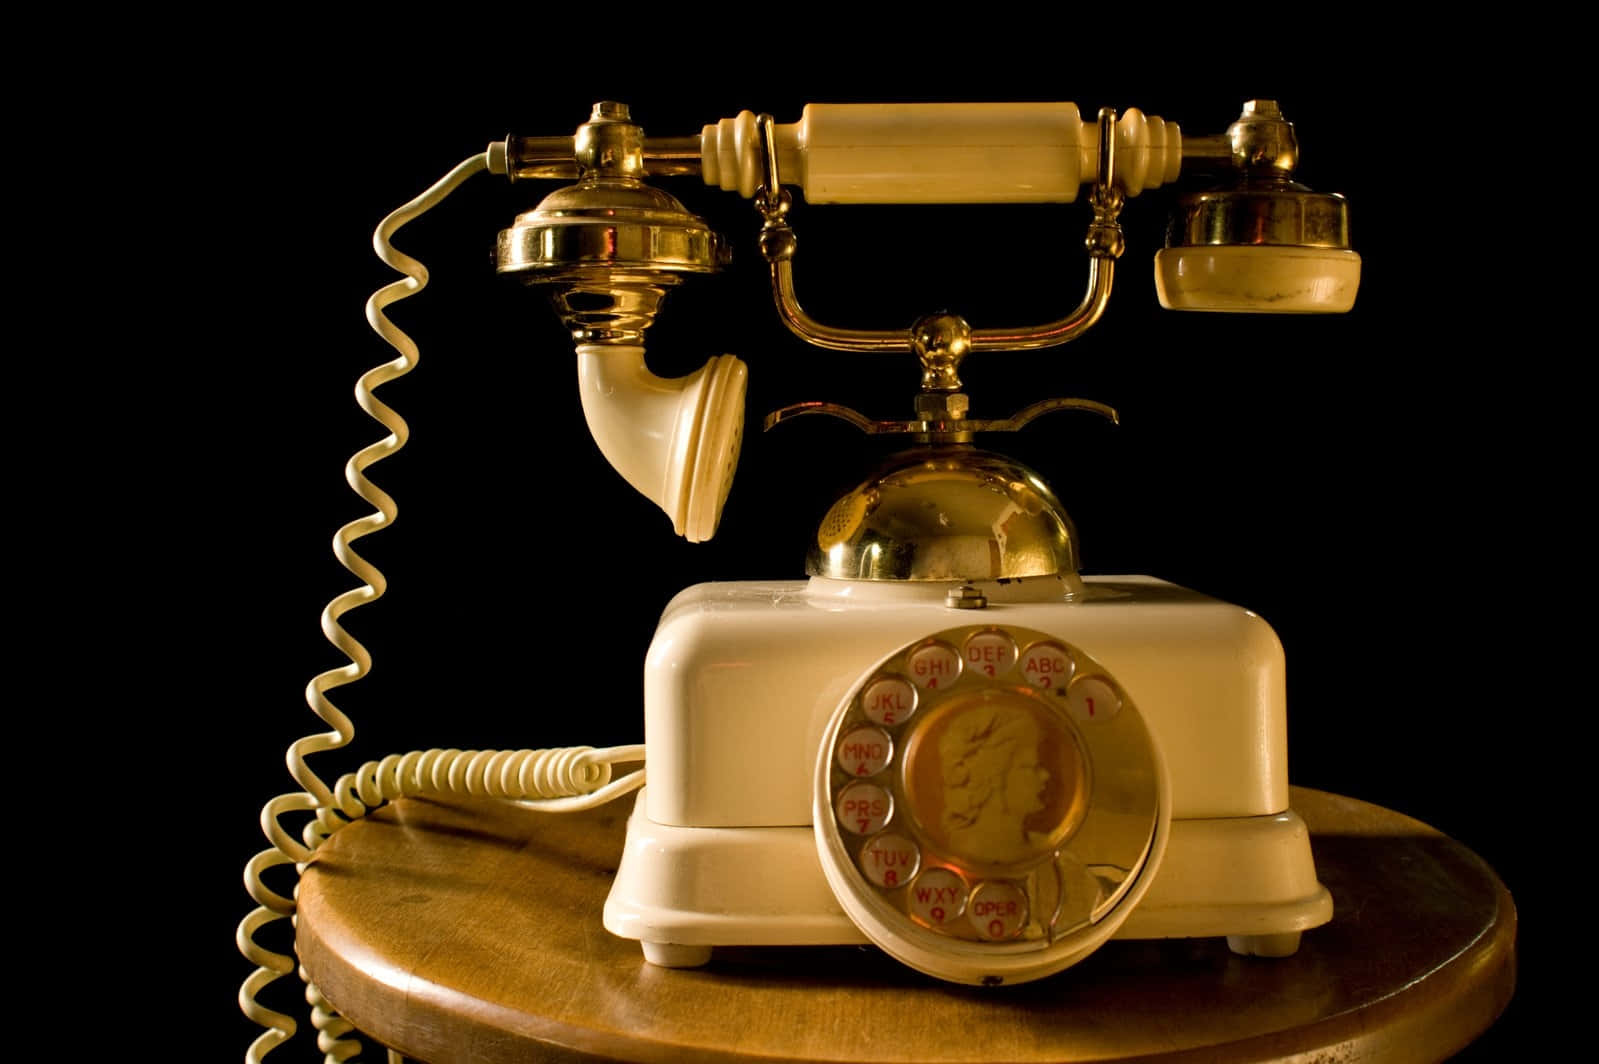 Vintage Rotary Telephoneon Wooden Table Wallpaper